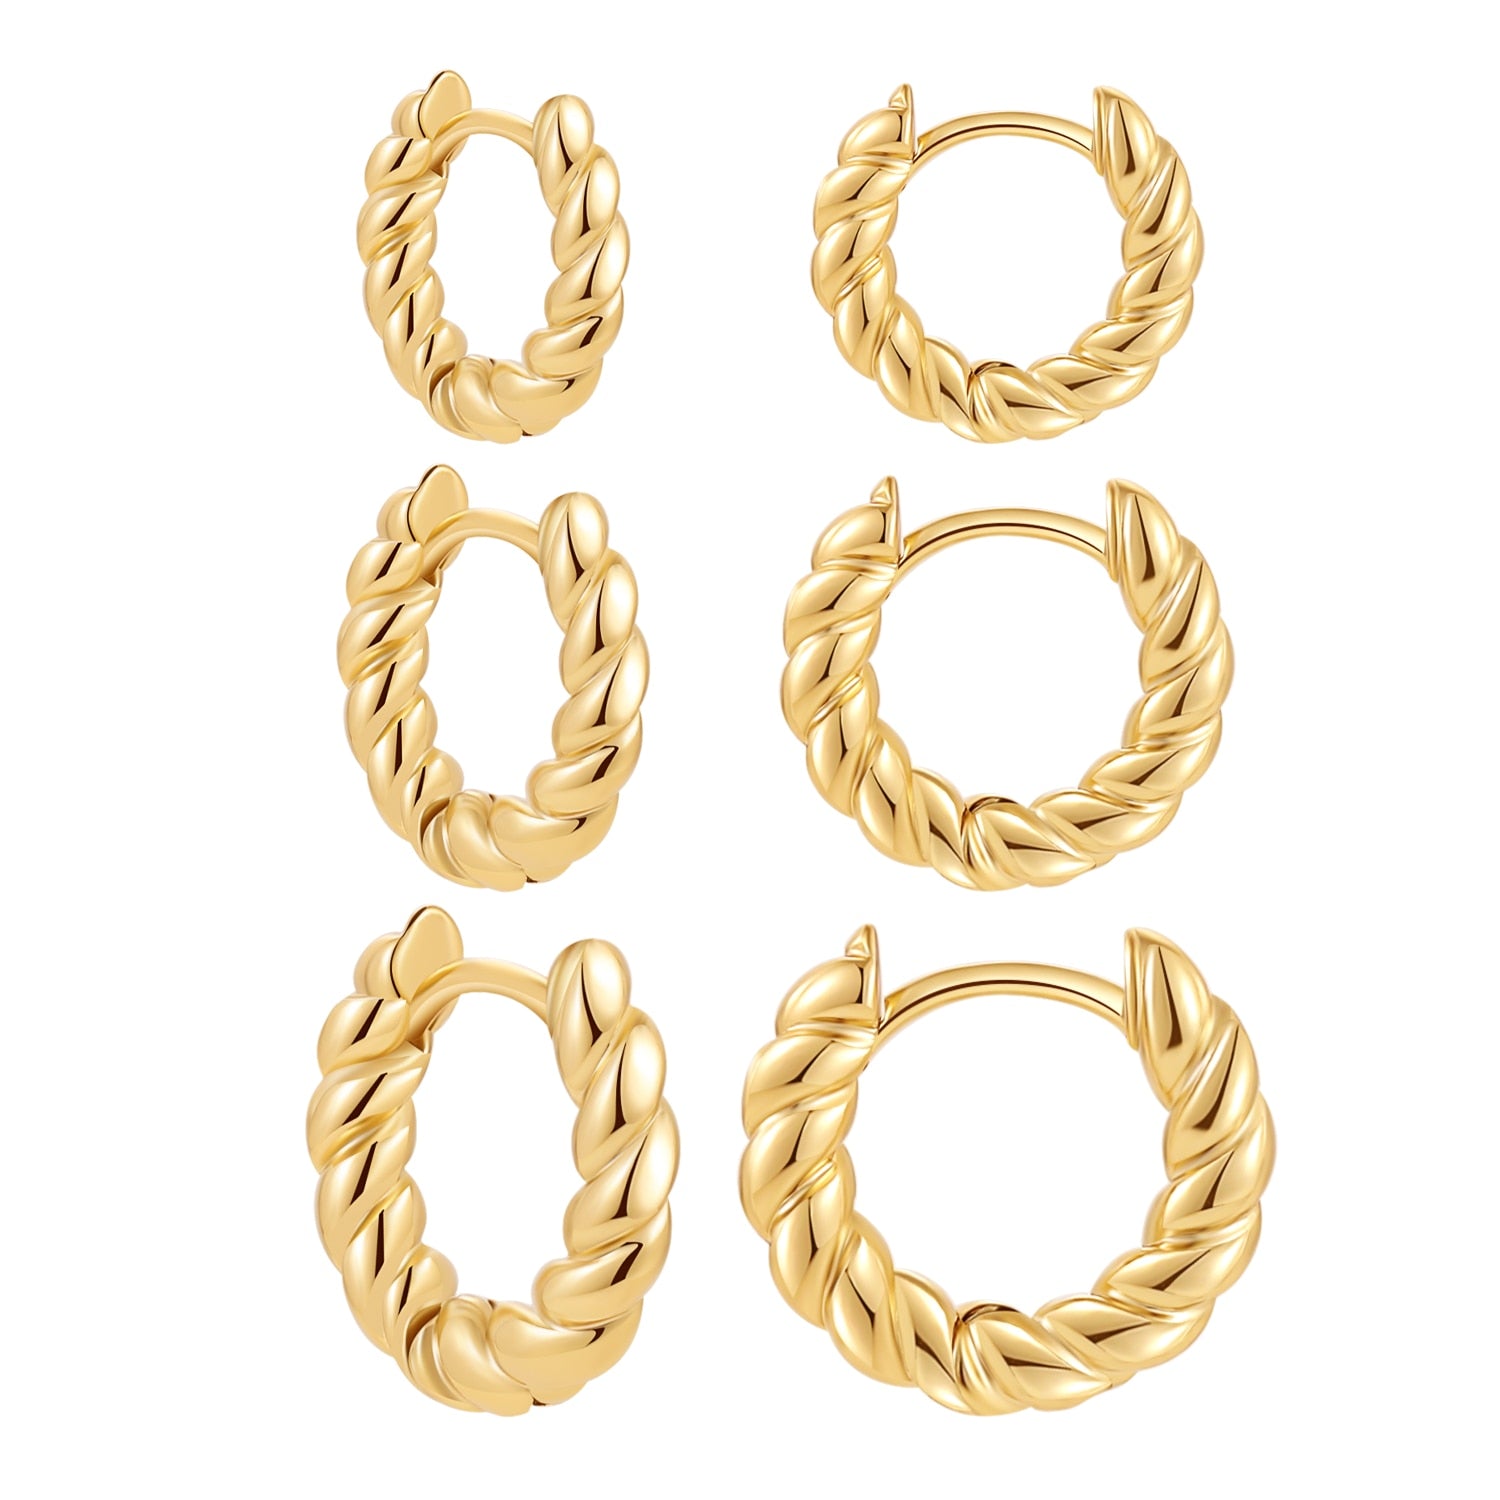 Maytrends 3pair Creative Gold Color Geometric Irregular Hammered Earrings Vintage Twisted Cuban Chain Hoop Earrings Set for Women Jewelry